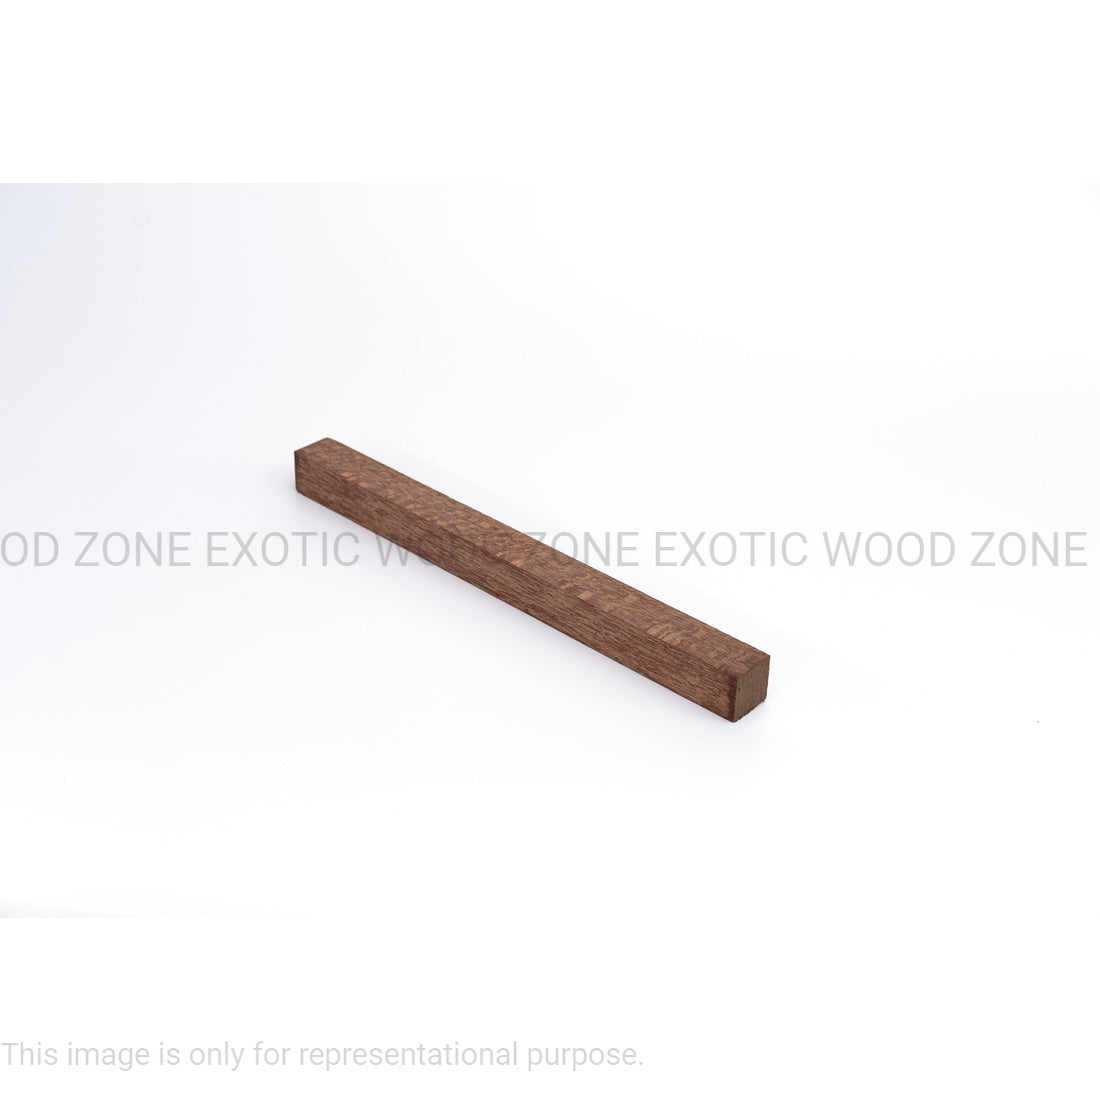 Leopardwood Hobby Wood/ Turning Wood Blanks 1 x 1 x 12 inches - Exotic Wood Zone - Buy online Across USA 